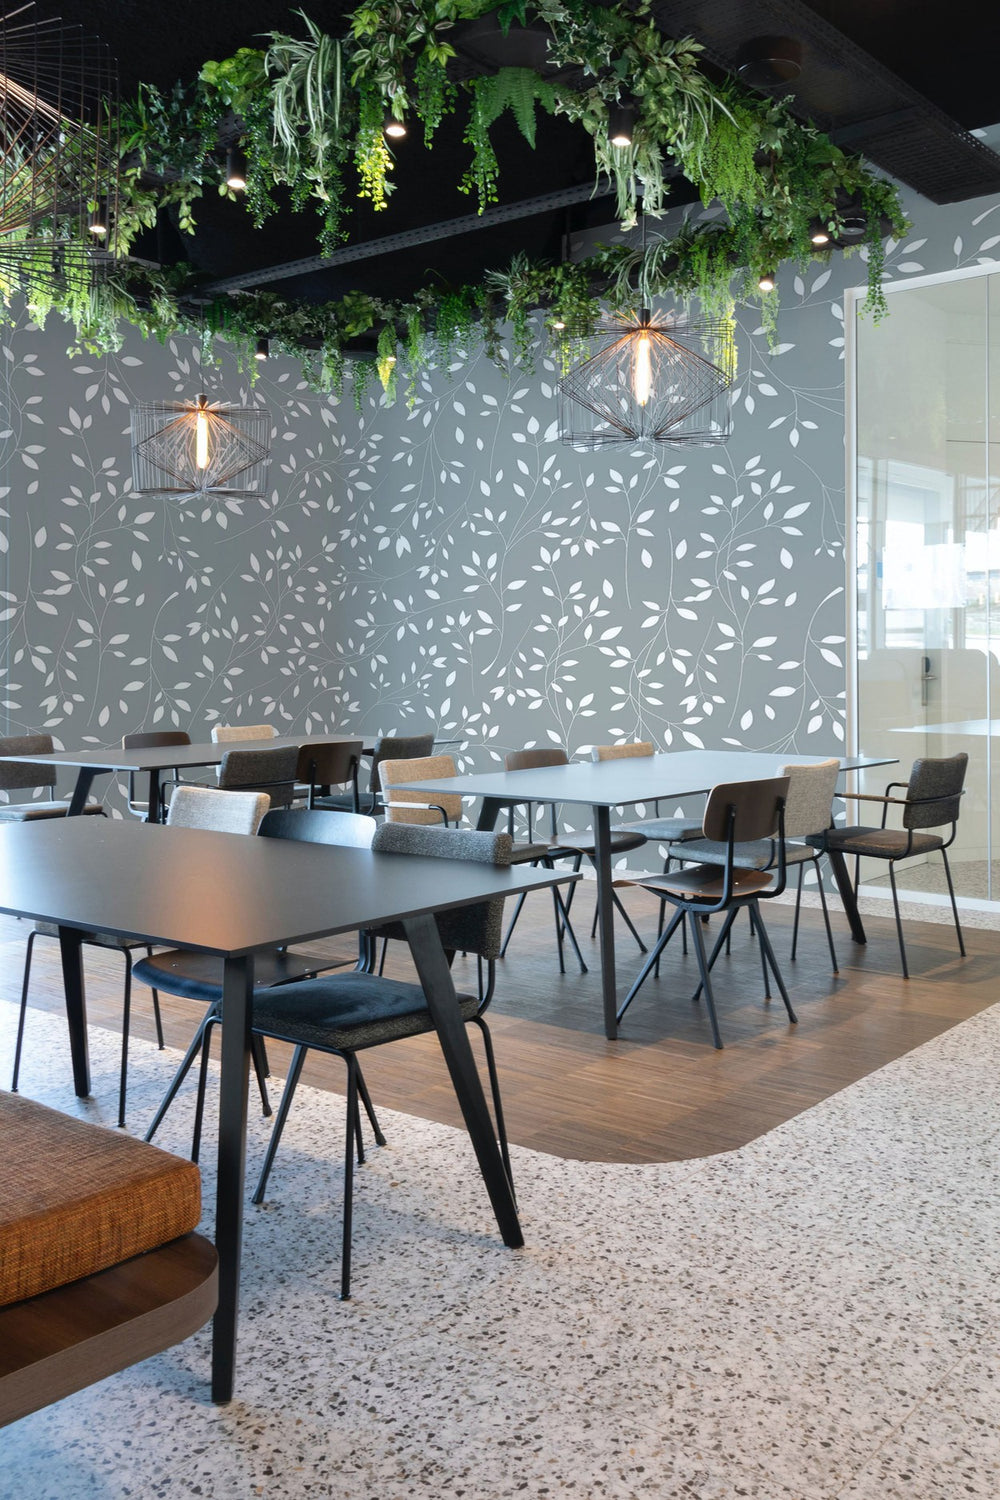 Interior of a modern office space with stylish chairs, tables and a decorative wall mural with botanical patterns